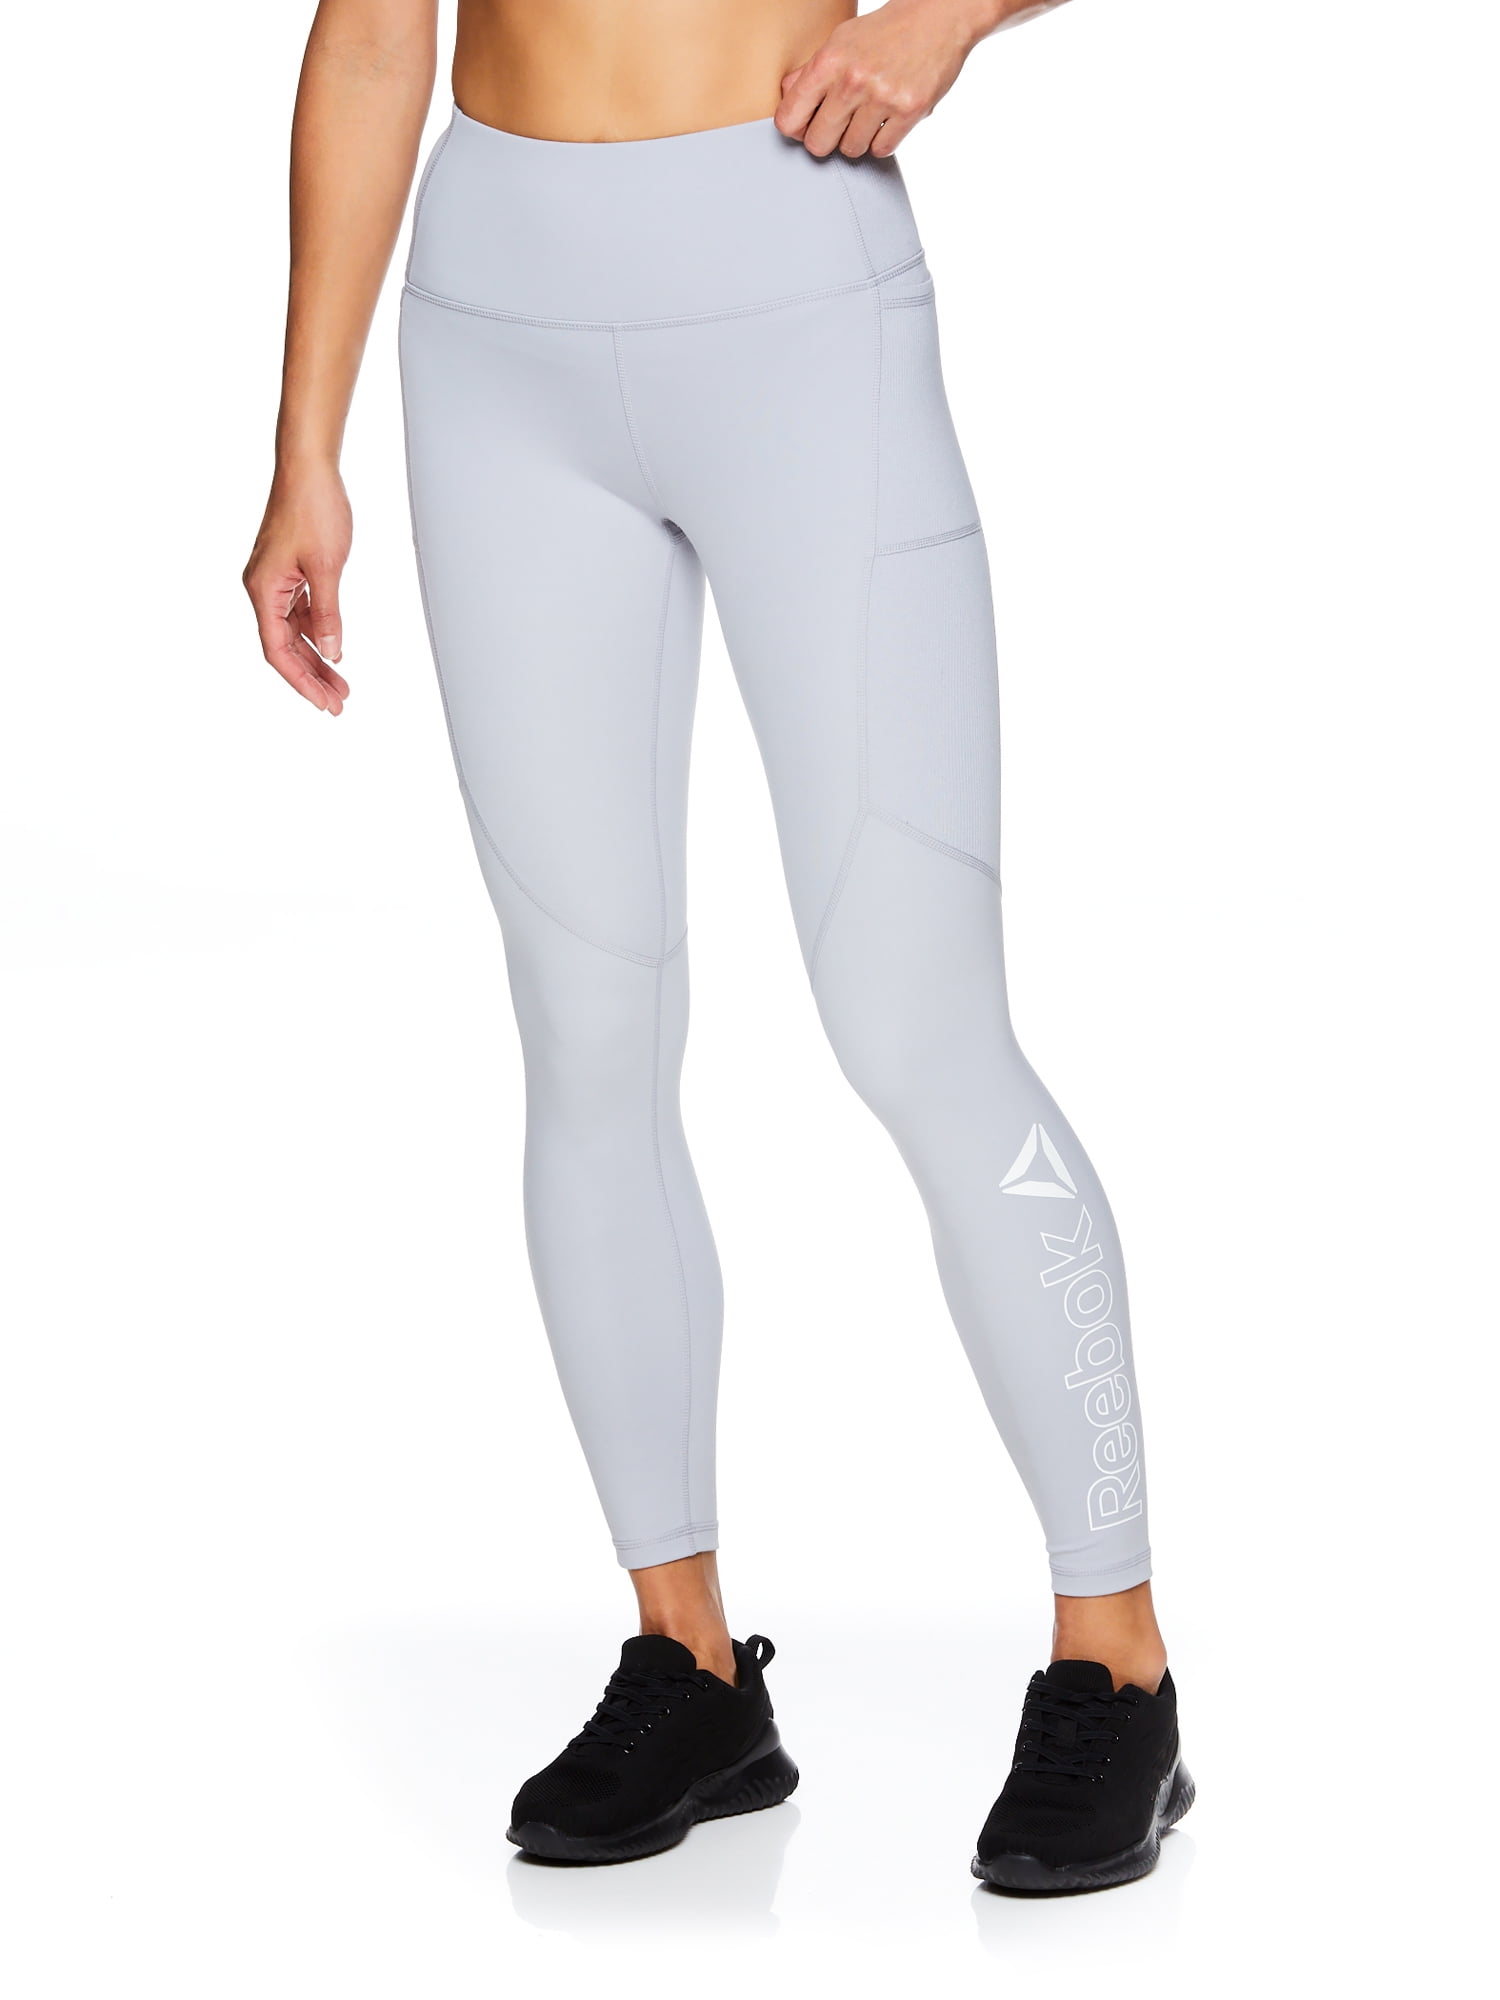 Reebok Womens Essential Highrise Ankle Length Leggings with Pockets, 25 ...